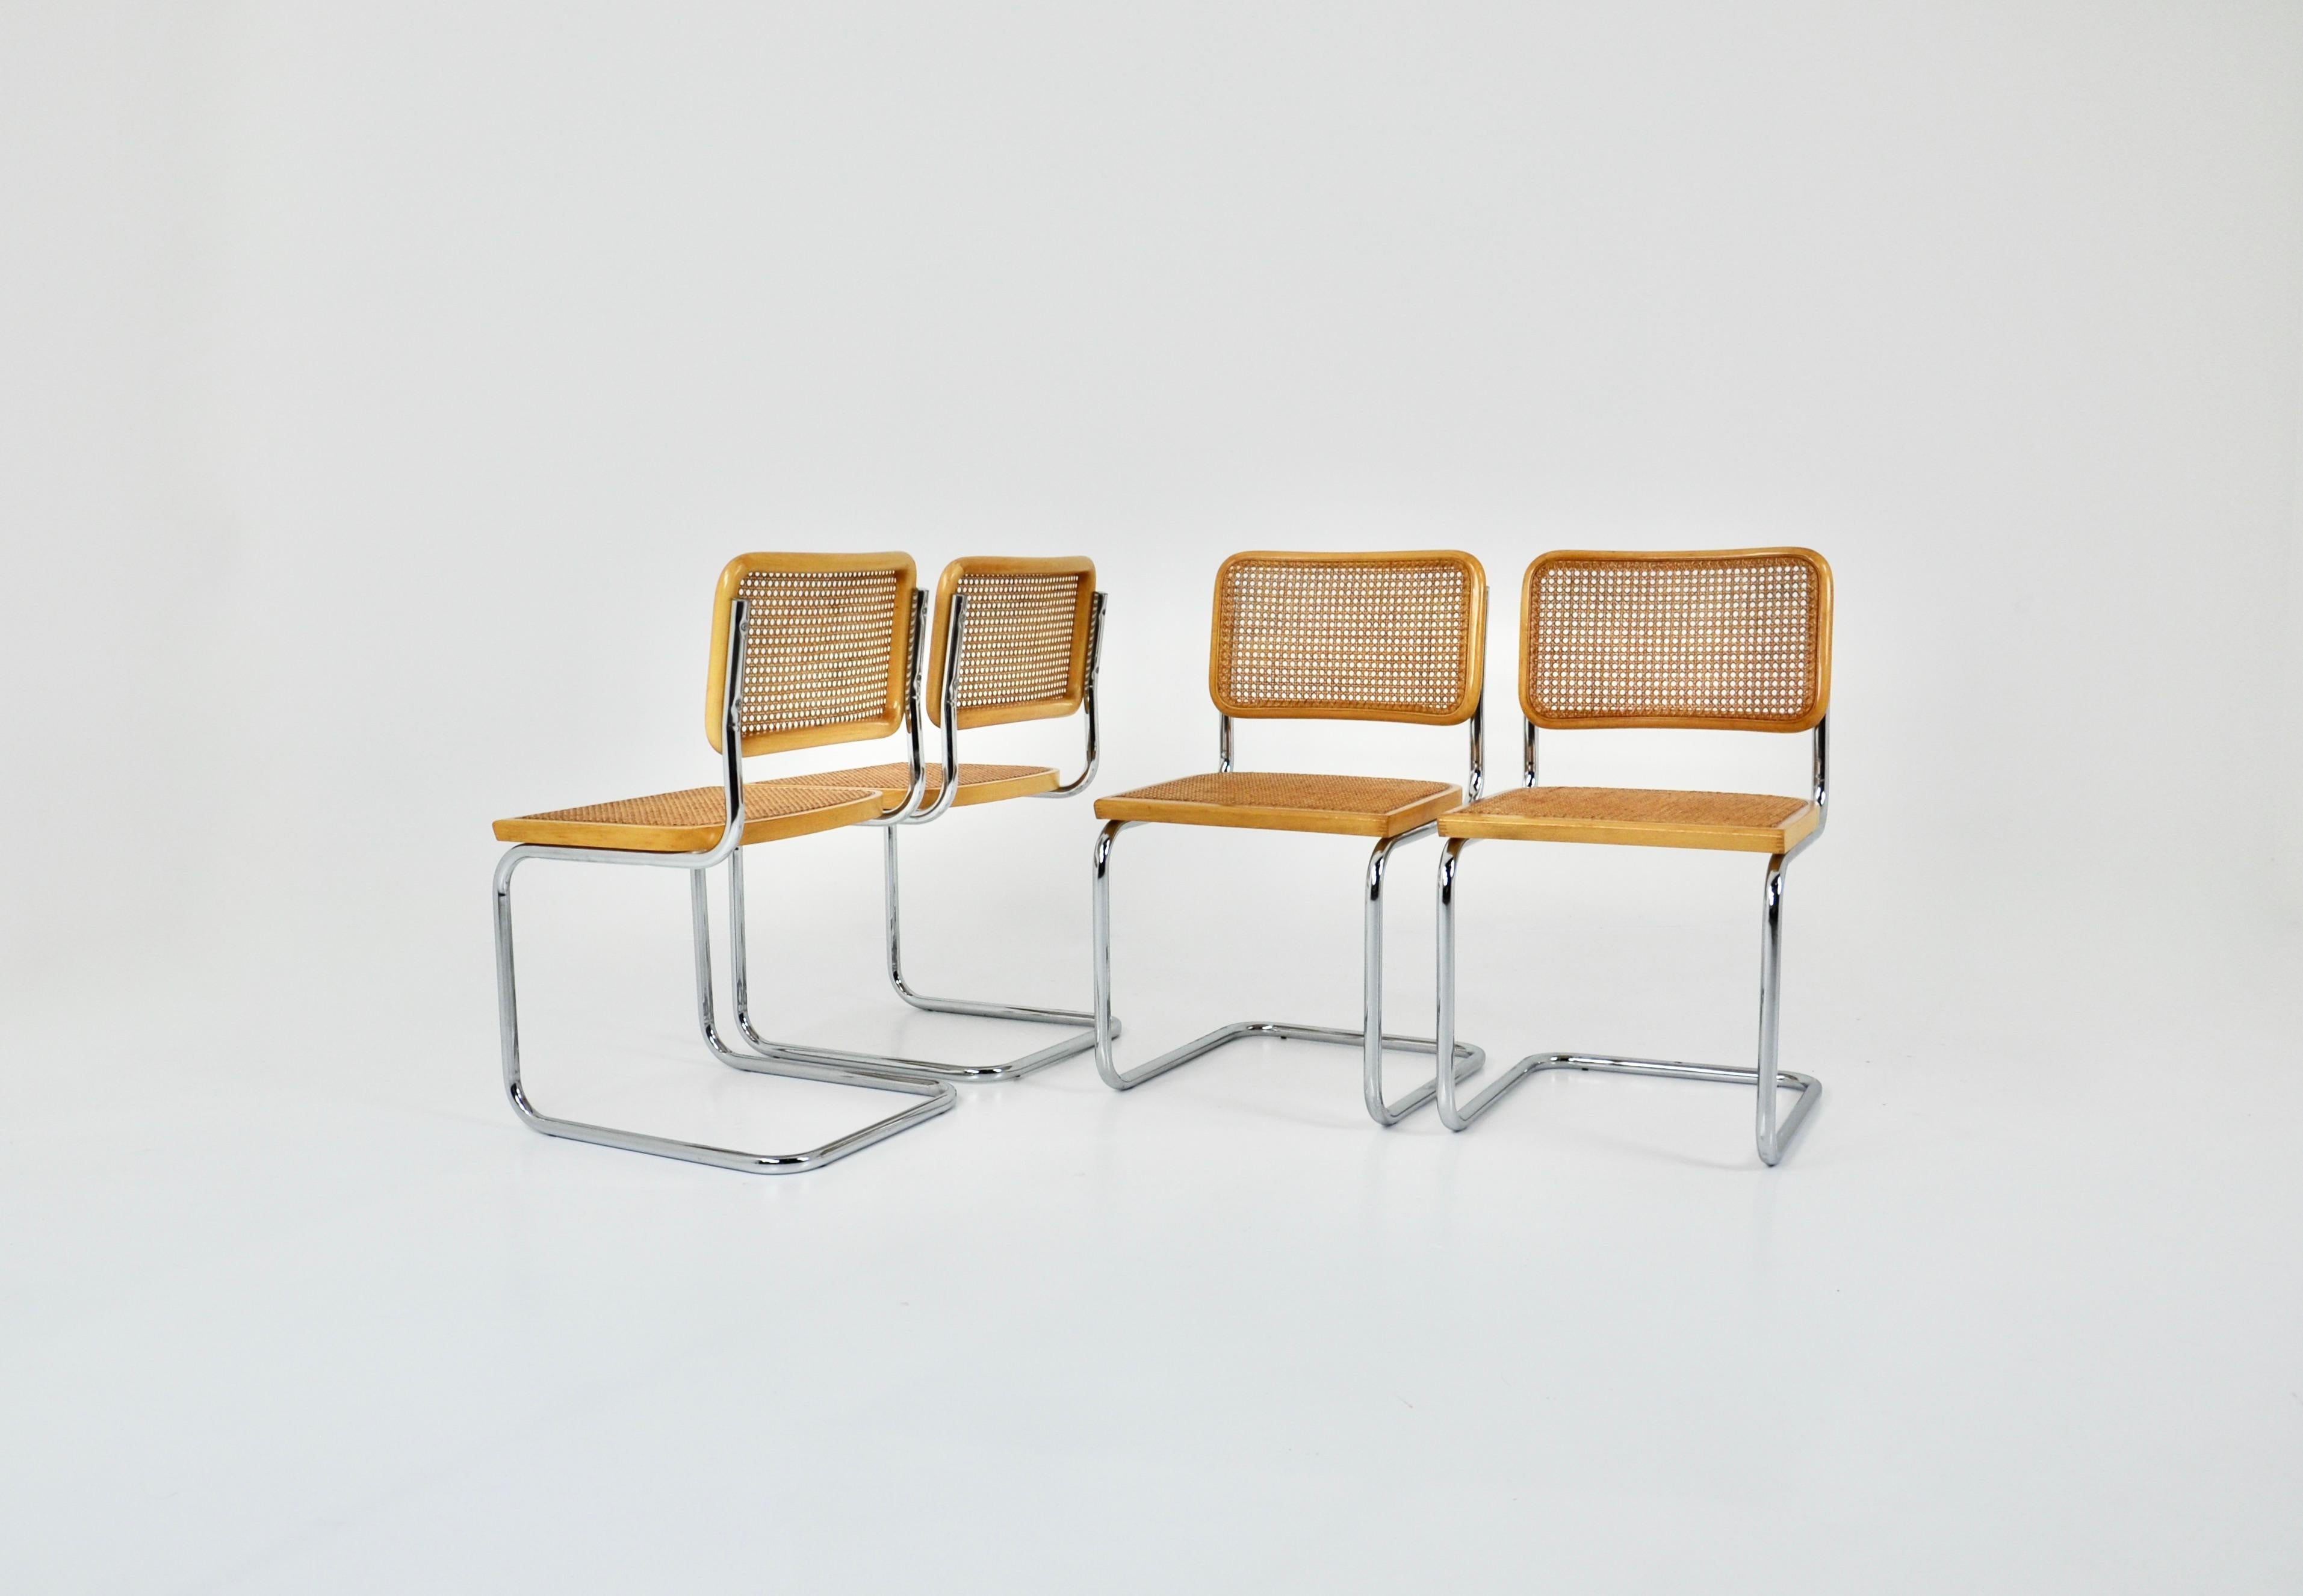 Set of 4 chairs in metal, wood and cane. Wear due to time and age of the chairs 
Measure: Seat height: 45cm.